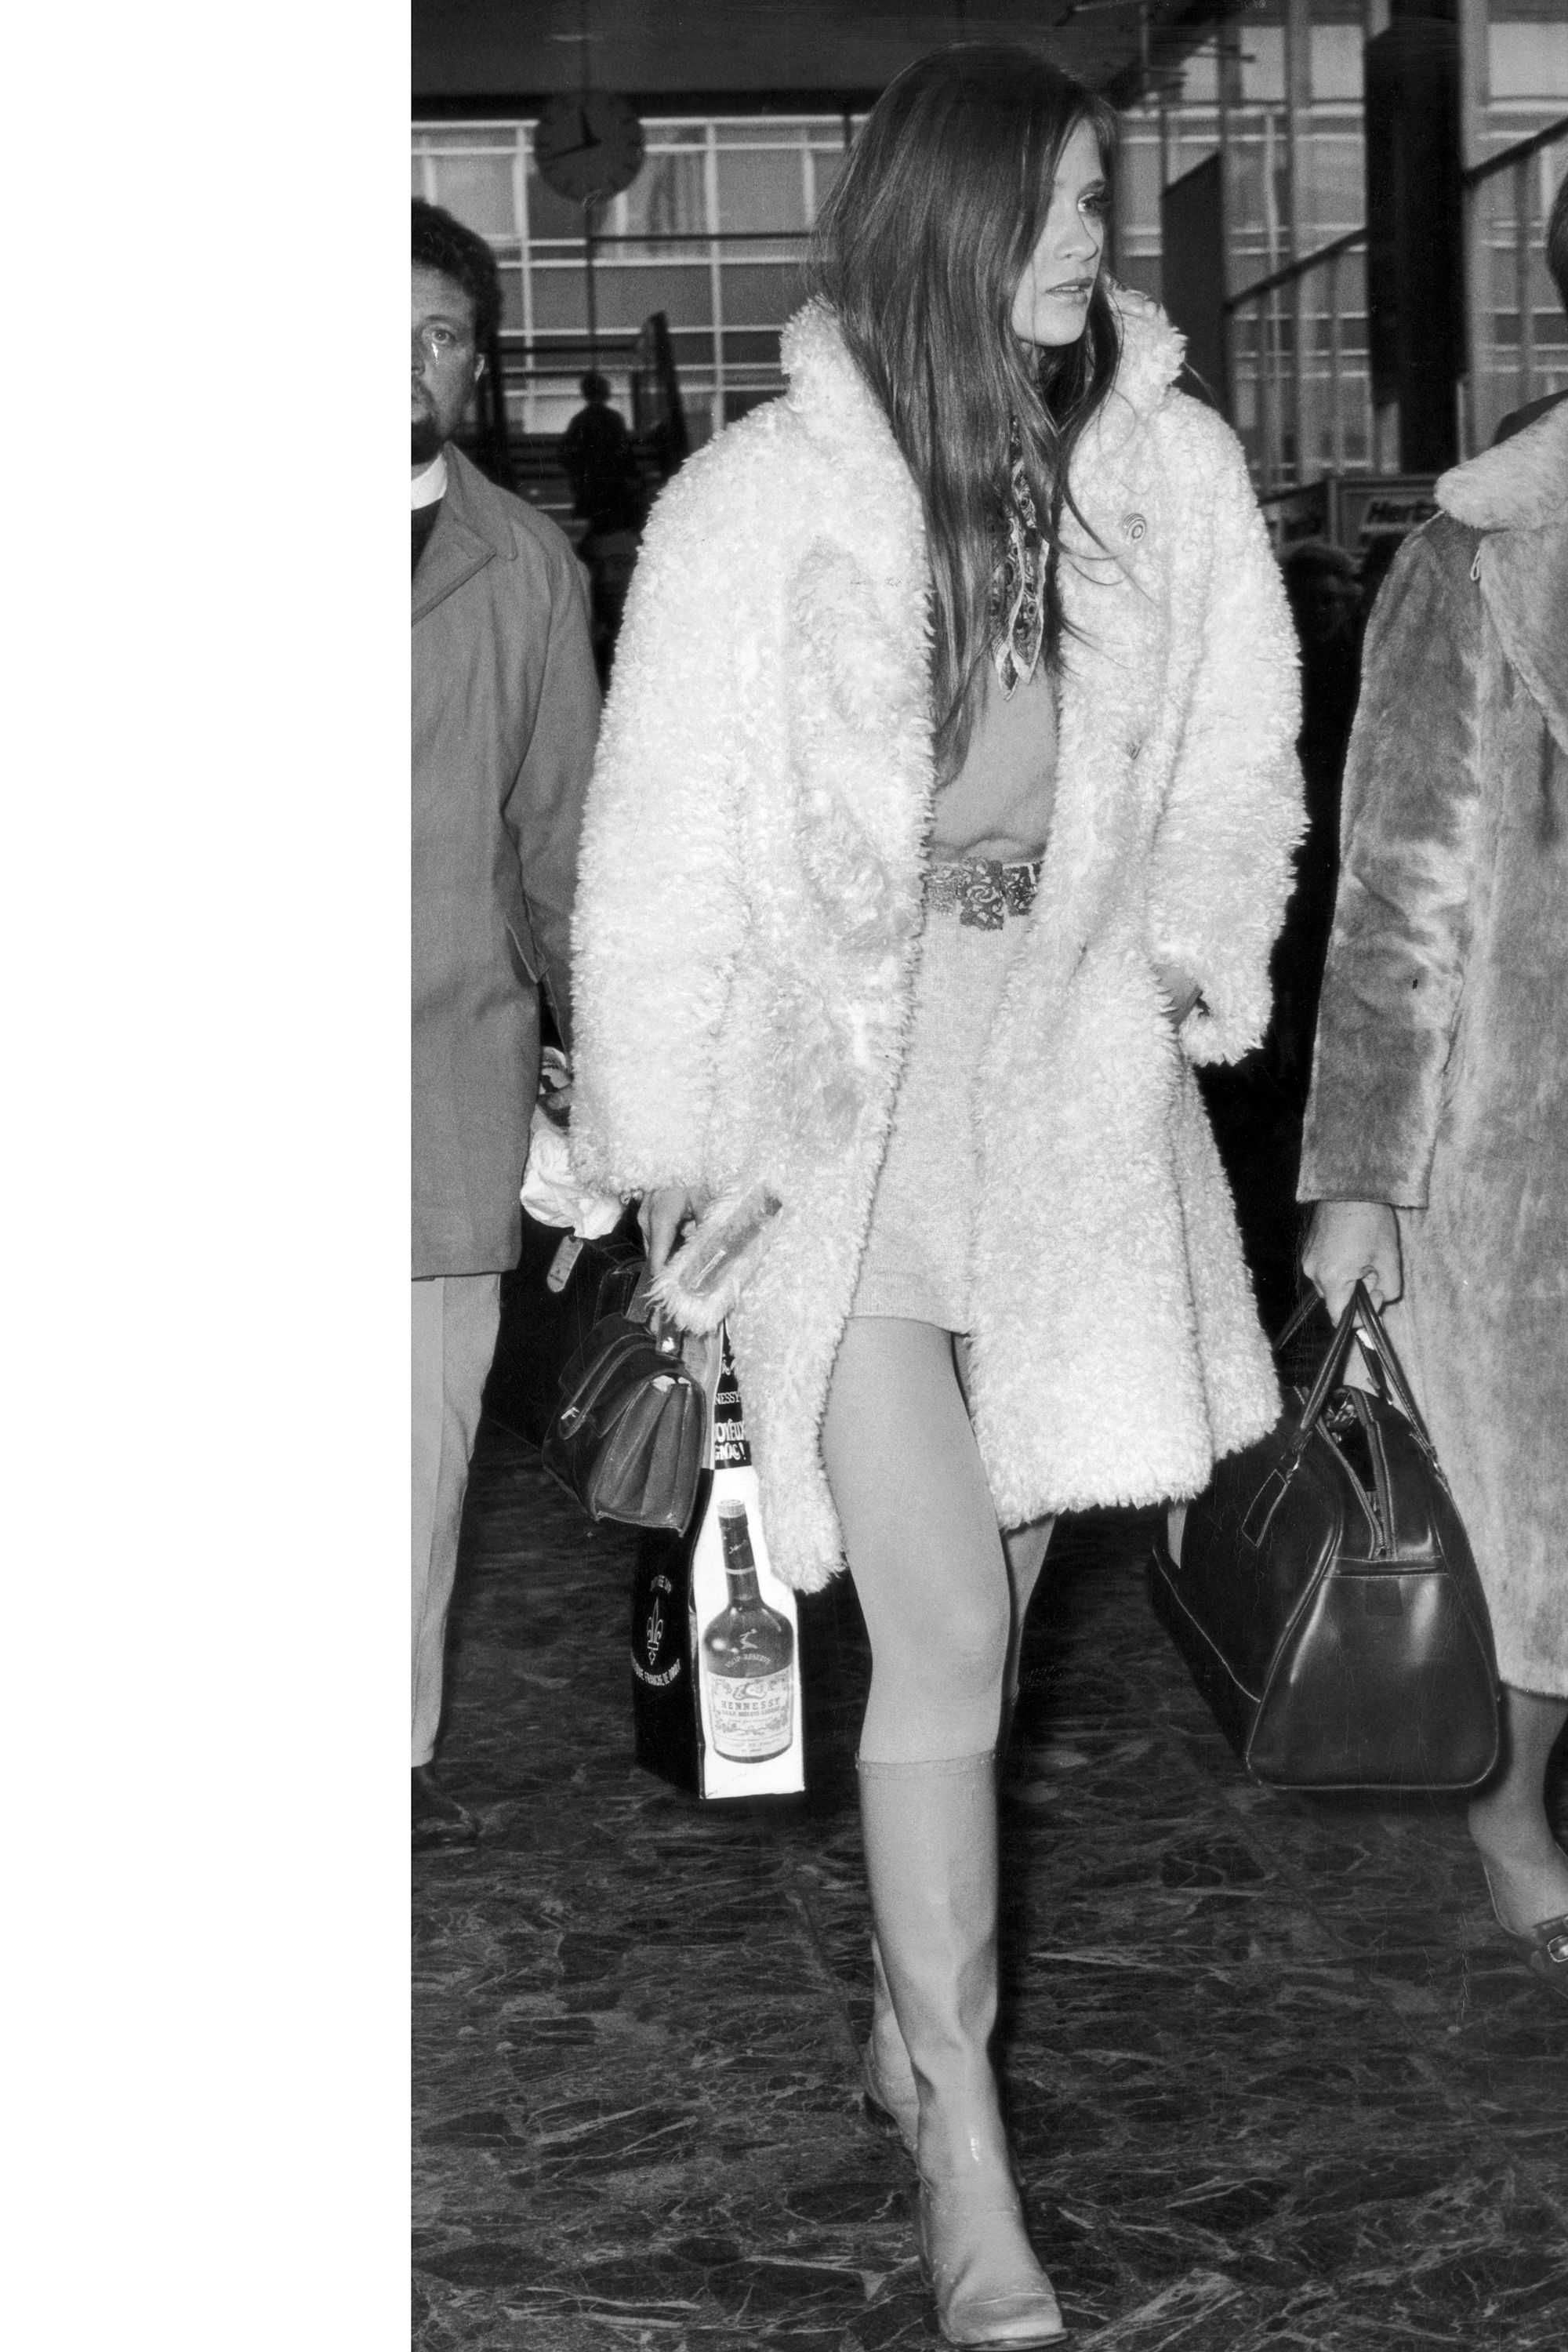 15 of the Most Chic Fashion Trends to Come From the '70s That We